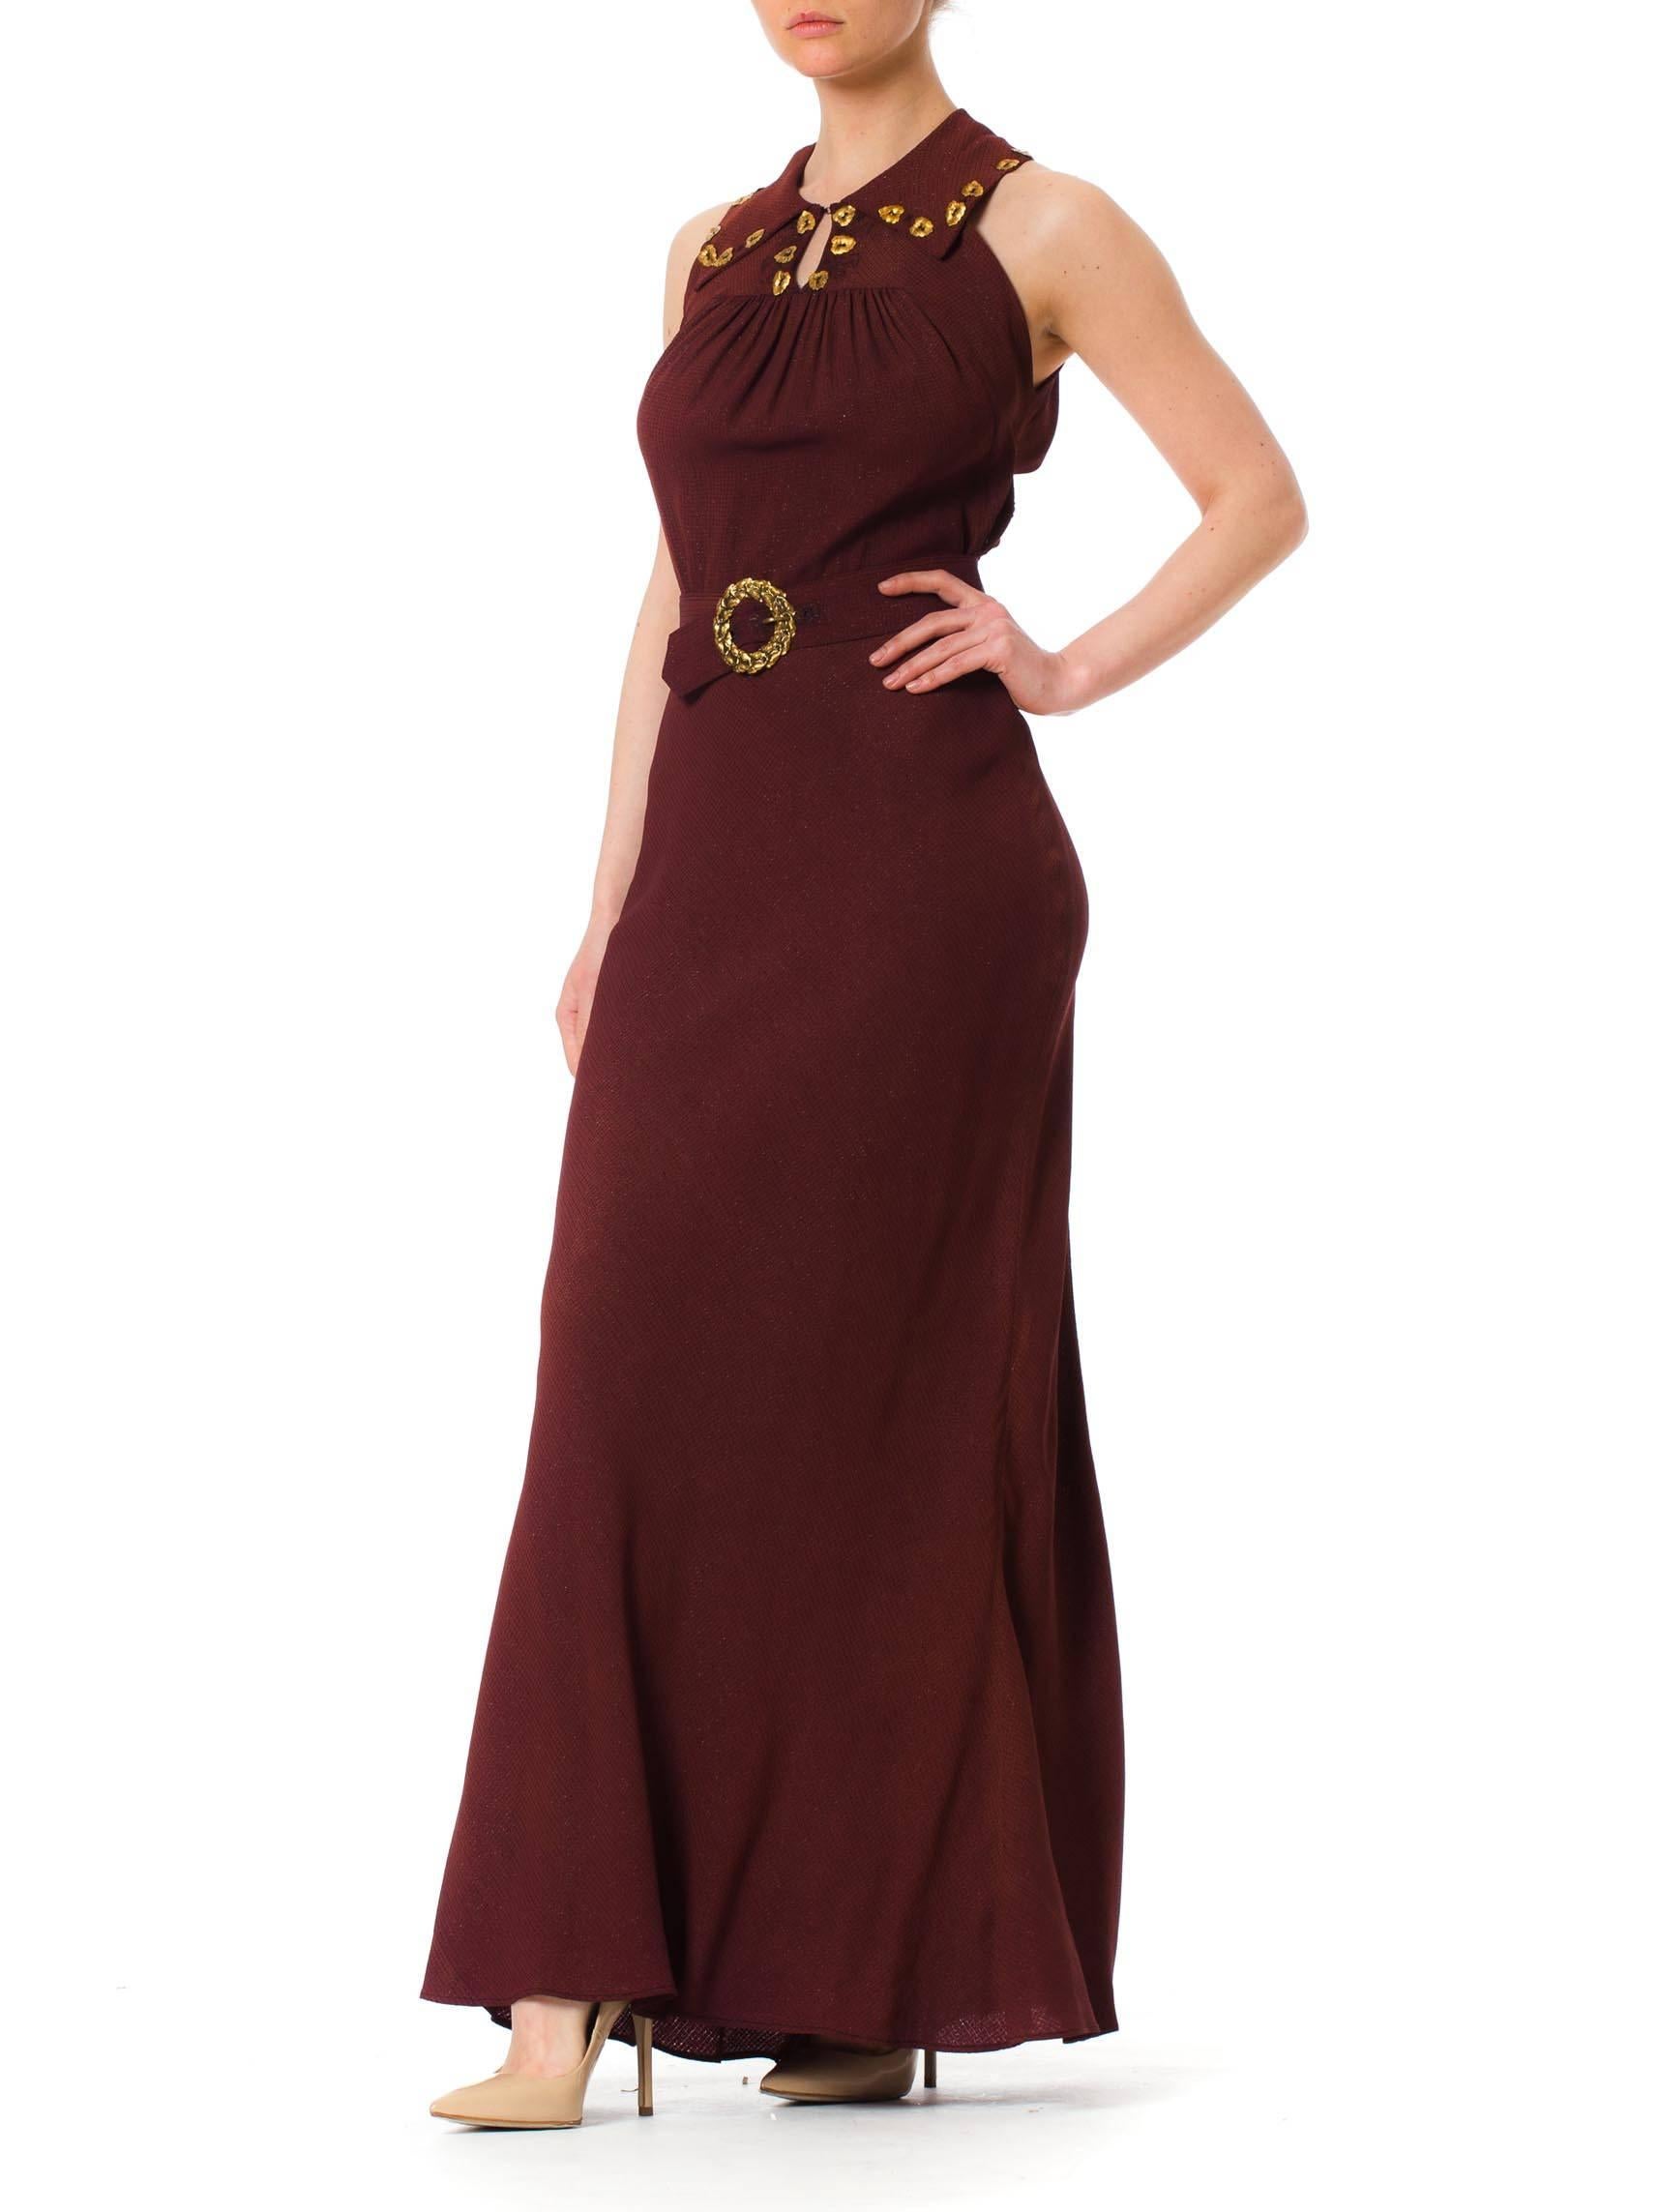 Women's 1930S Russet Brown Bias Cut Rayon & Lurex Crepe Gown With Schiaparelli Style Br For Sale